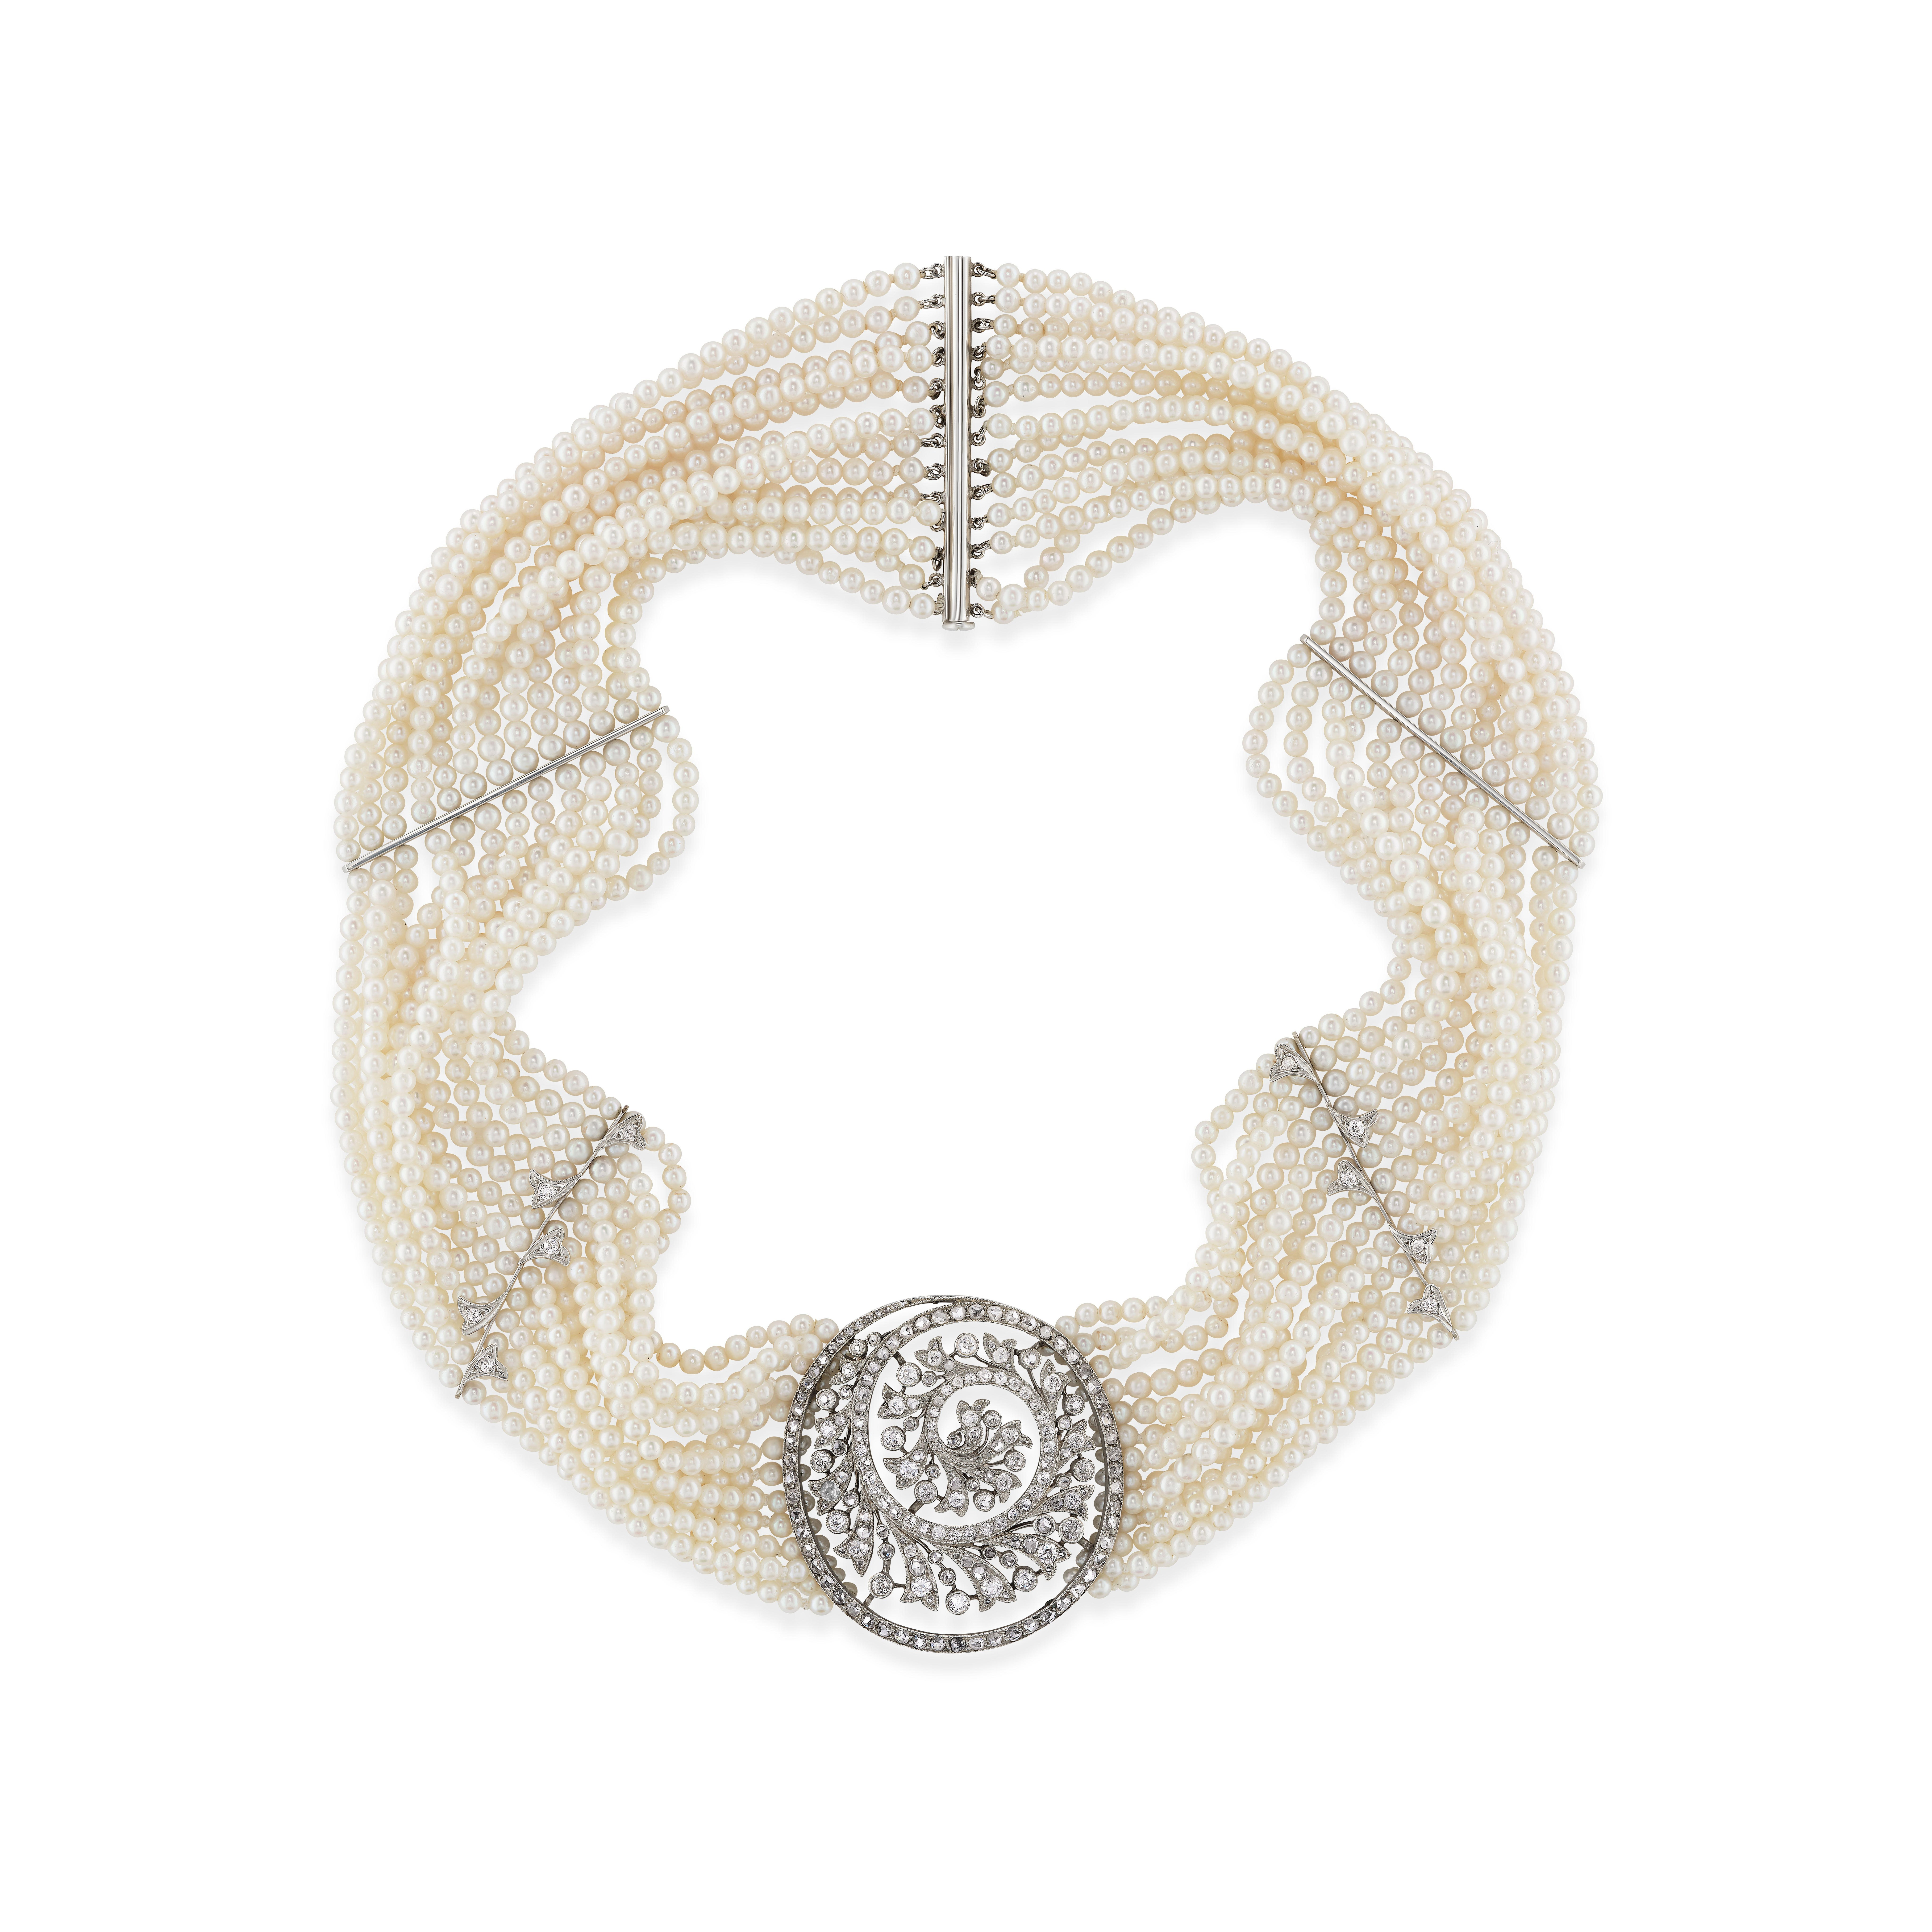 The thirteen strand cultured pearl collar necklace, with tubular slide-clasp ends, center highlights a platinum and diamond set spiral medallion, designed as a diamond set feather-edged spiral within the spiral's diamond set frame. Two knife-edged